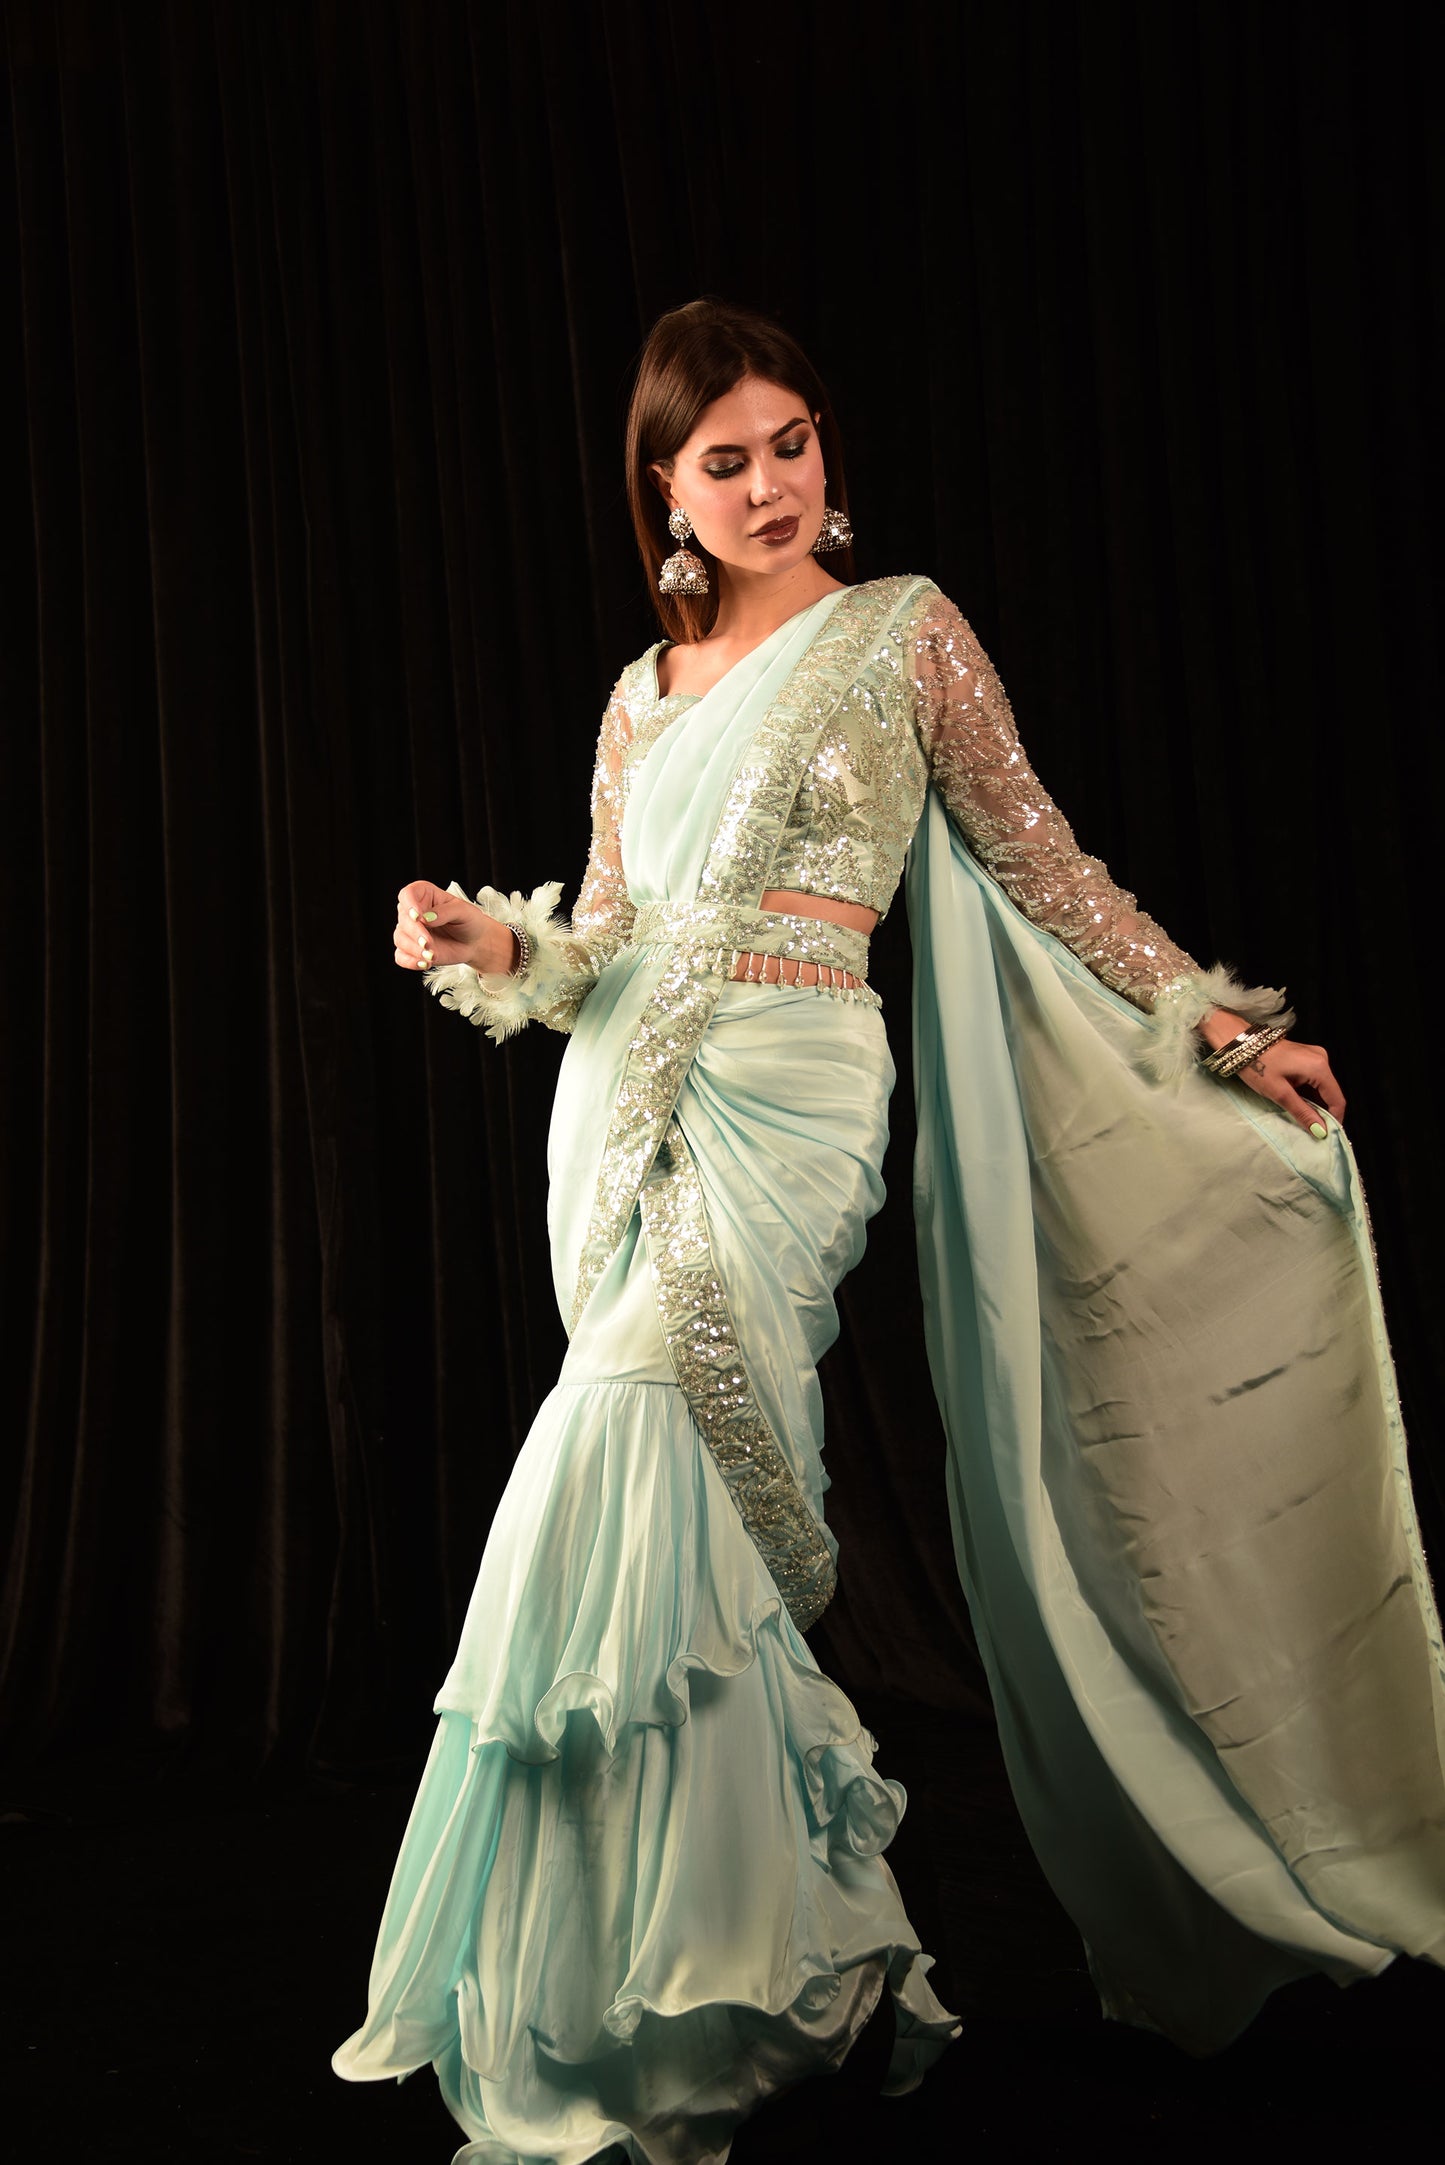 TURQUOISE BLUE PRE DRAPE SAREE WITH HAND EMBROIDED BLOUSE AND BELT